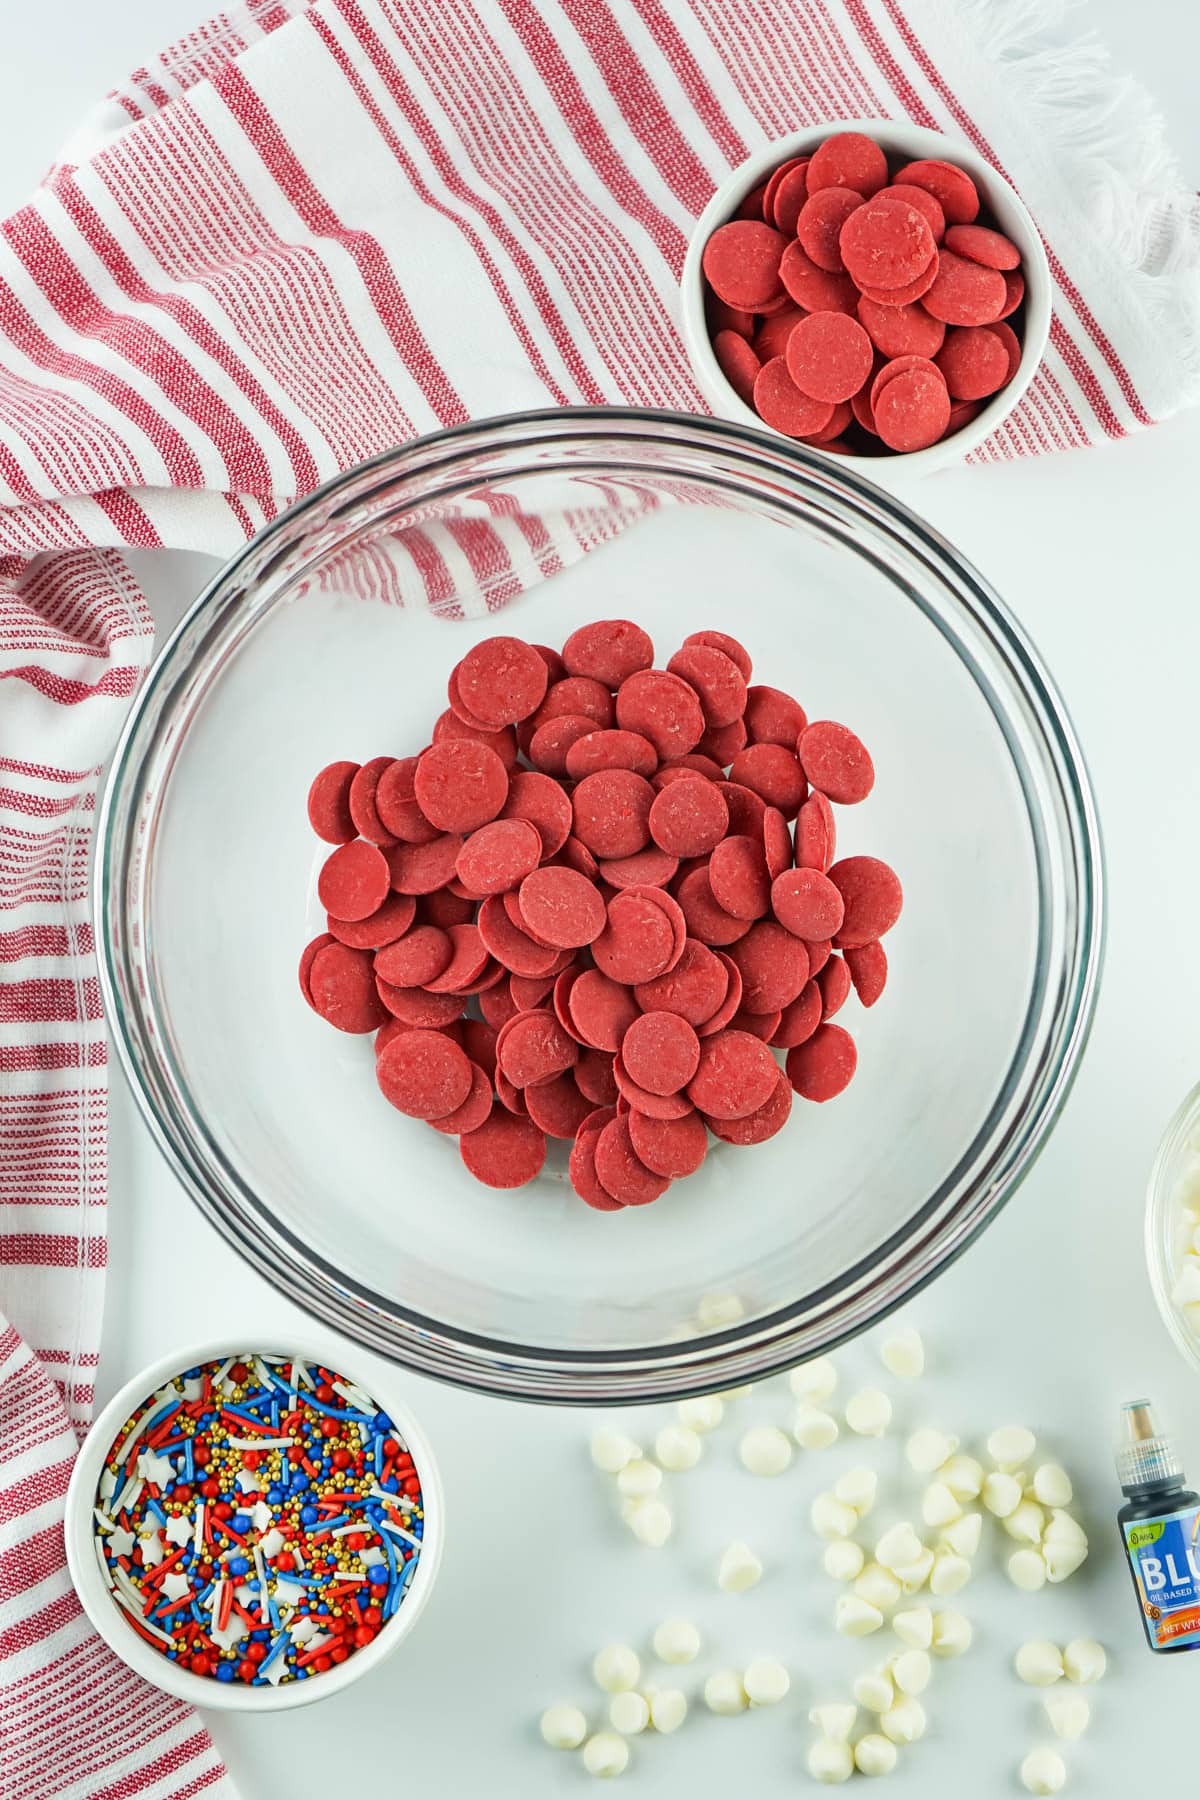 Red candy melts in glass mixing bowl